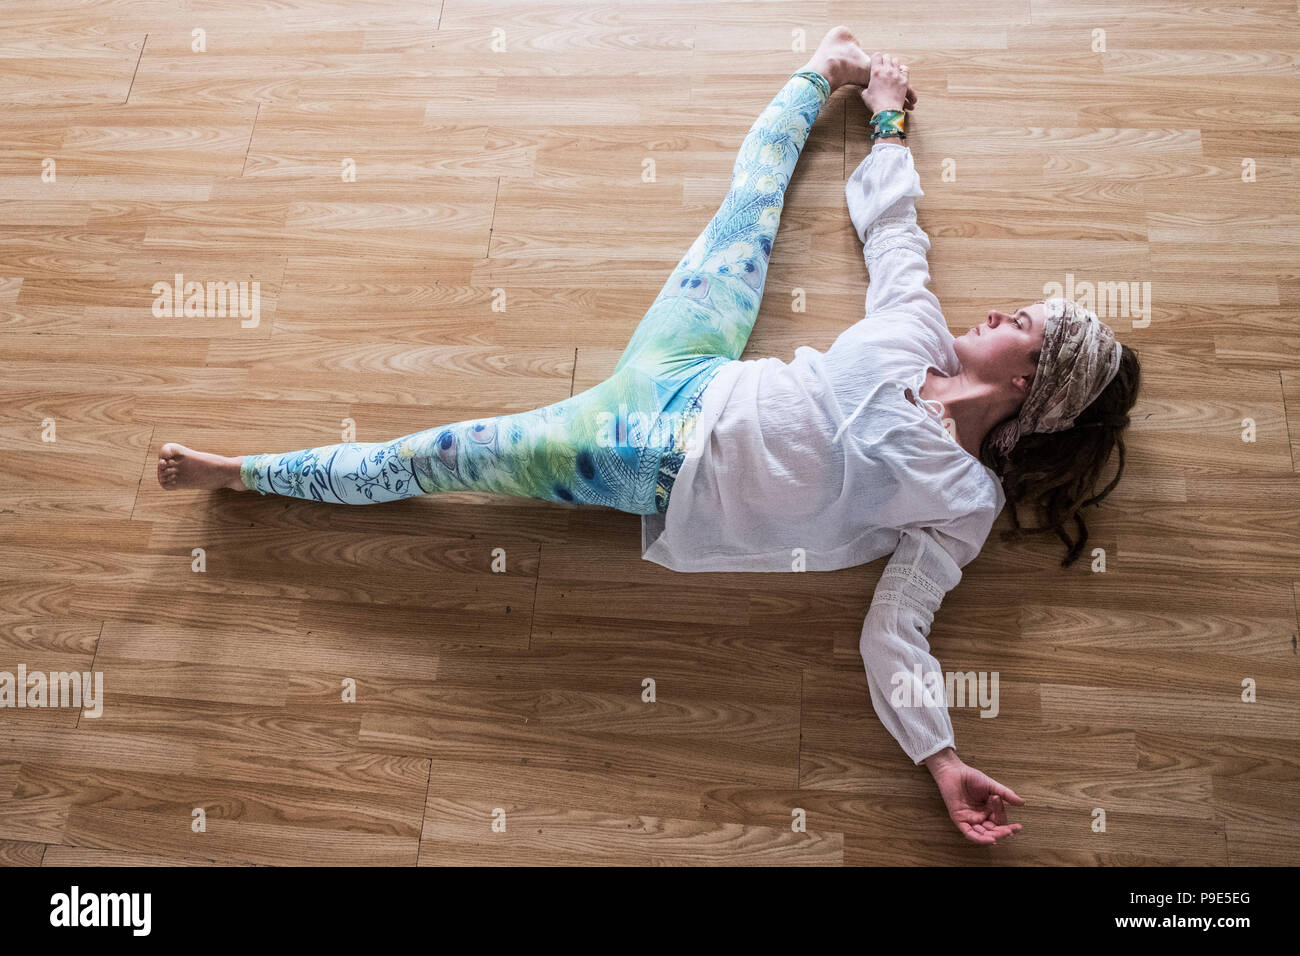 High angle view of young woman wearing headscarf and white blouse lying on her back on hardwood floor, doing yoga. Stock Photo